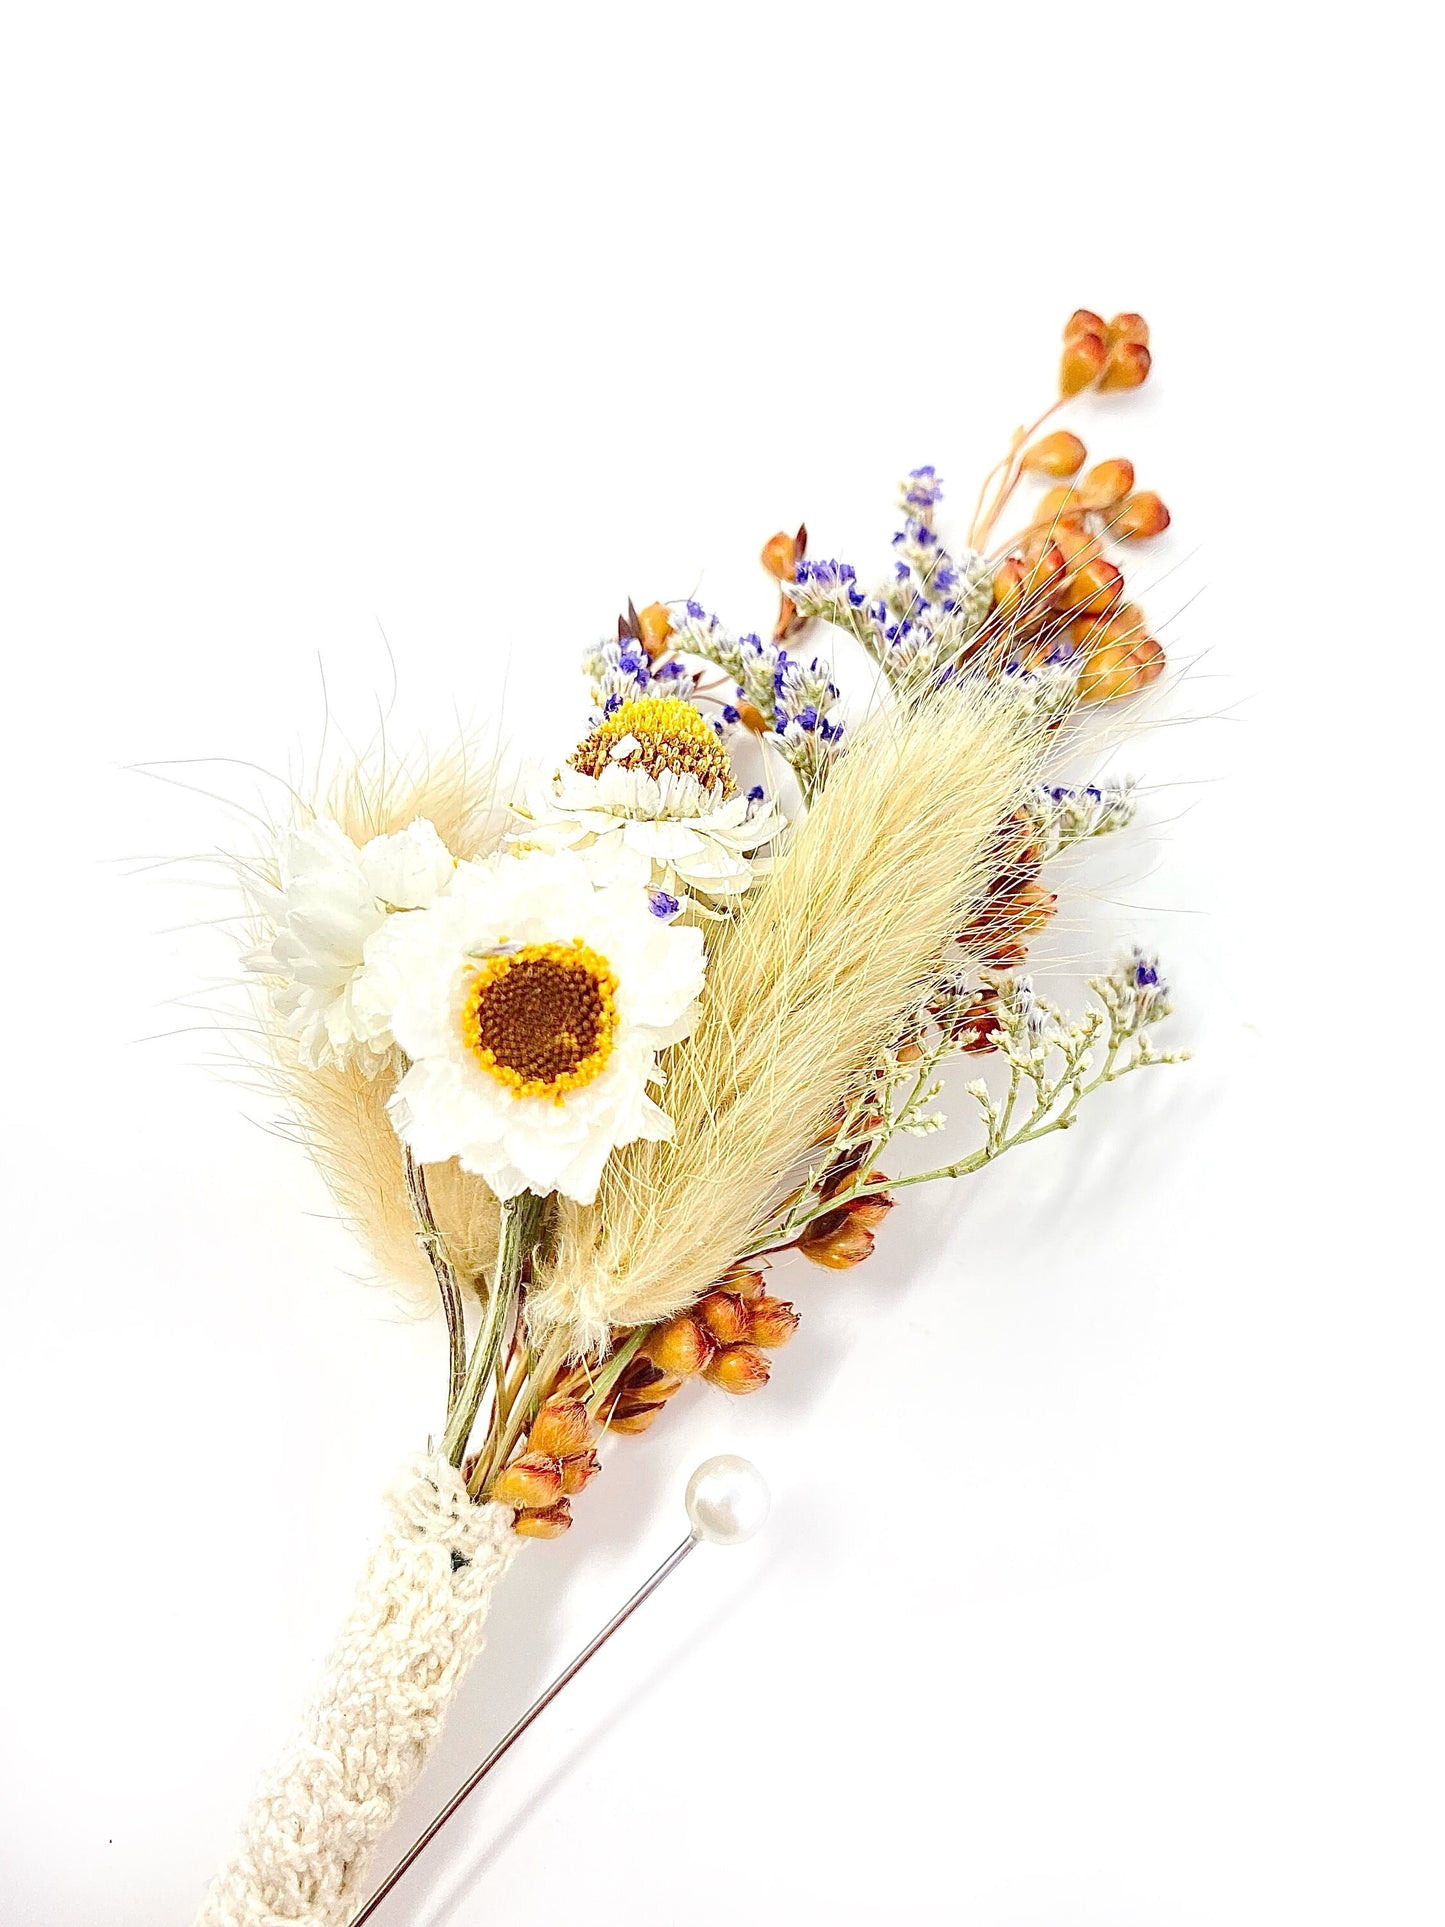 Wedding Boutonniere, Dried Flowers, Preserved Floral, Wedding Accessories, Bunny Tails, Ammobium